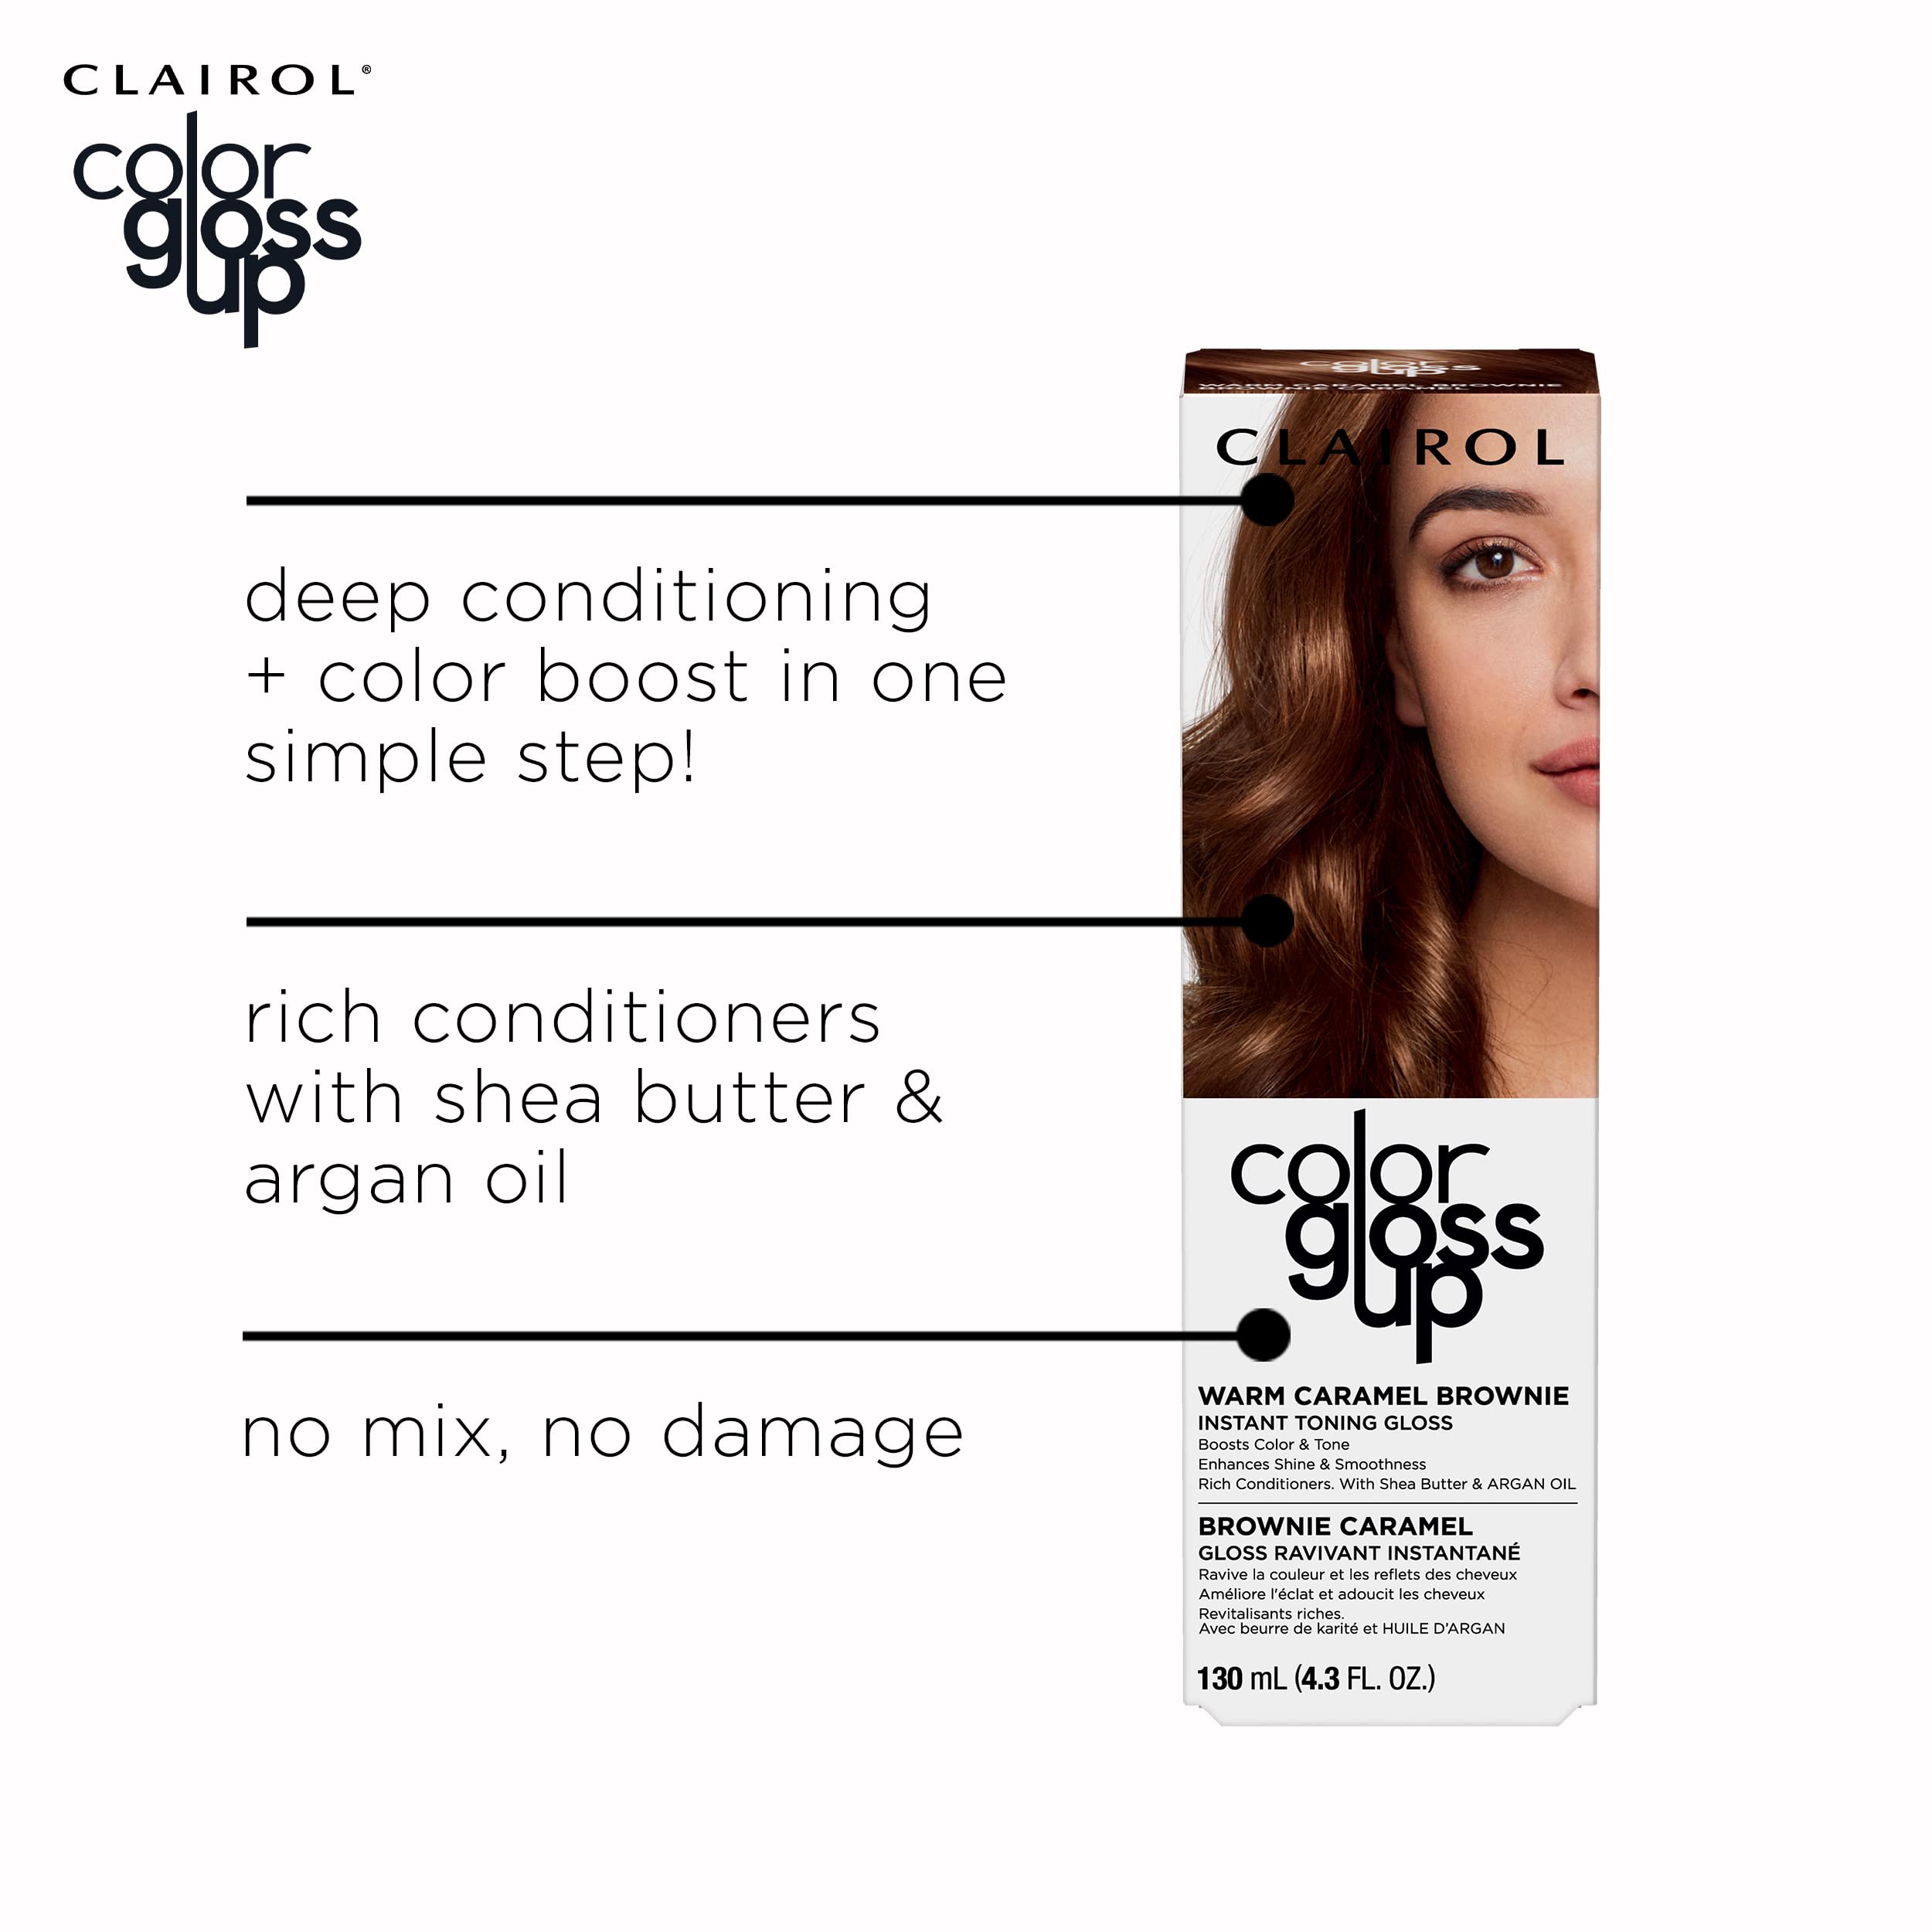 Clairol Color Gloss Up Temporary Hair Dye, Terra Copper Hair Color, Pack of 1 (Packaging may vary)